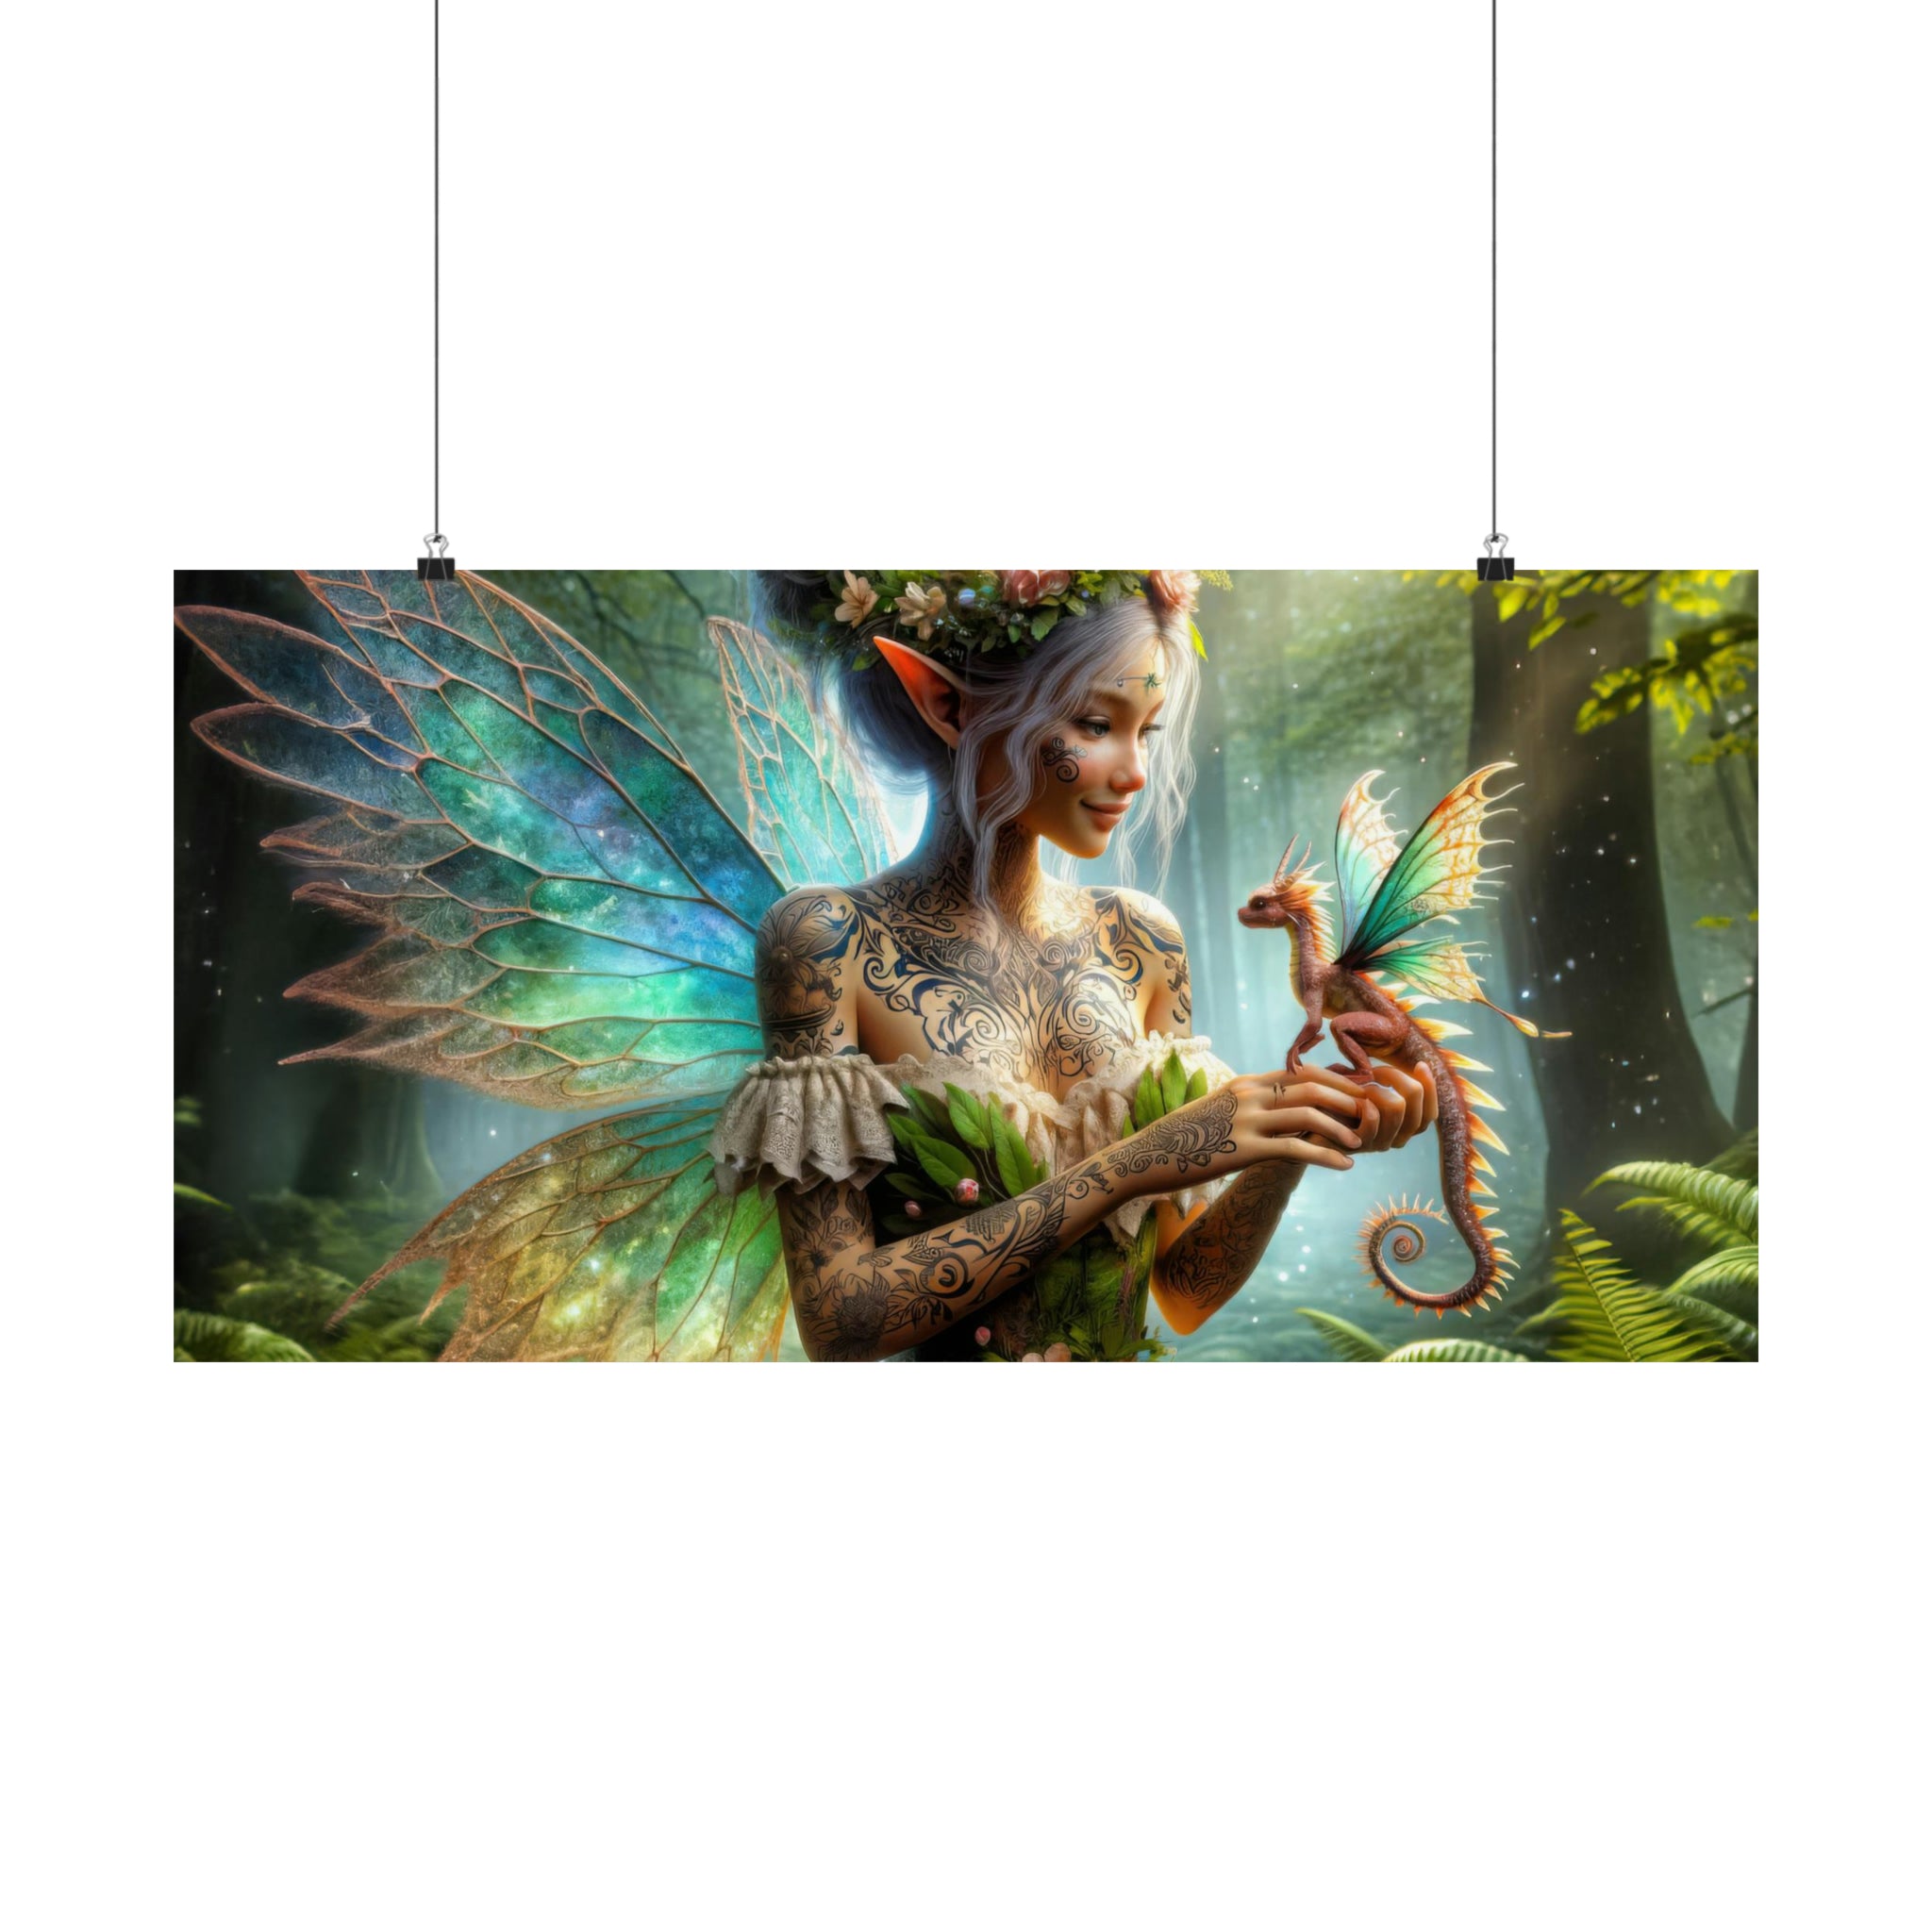 The Faerie and Her Dragonette Poster